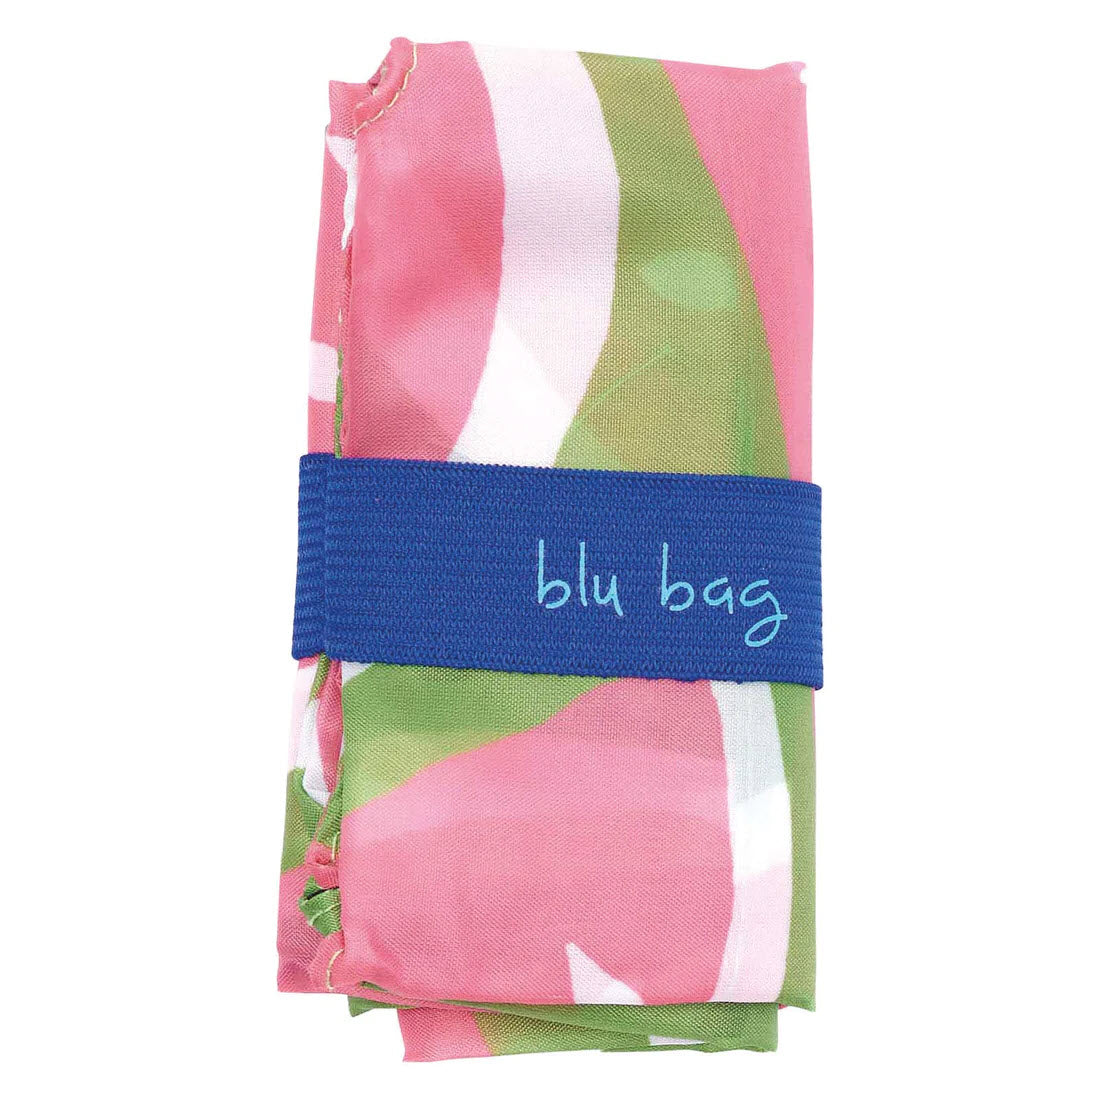 A colorful folded eco-friendly BLU BAG WATERMELON with pink, white, and green abstract patterns, secured by a blue strap from Rockflowerpaper.